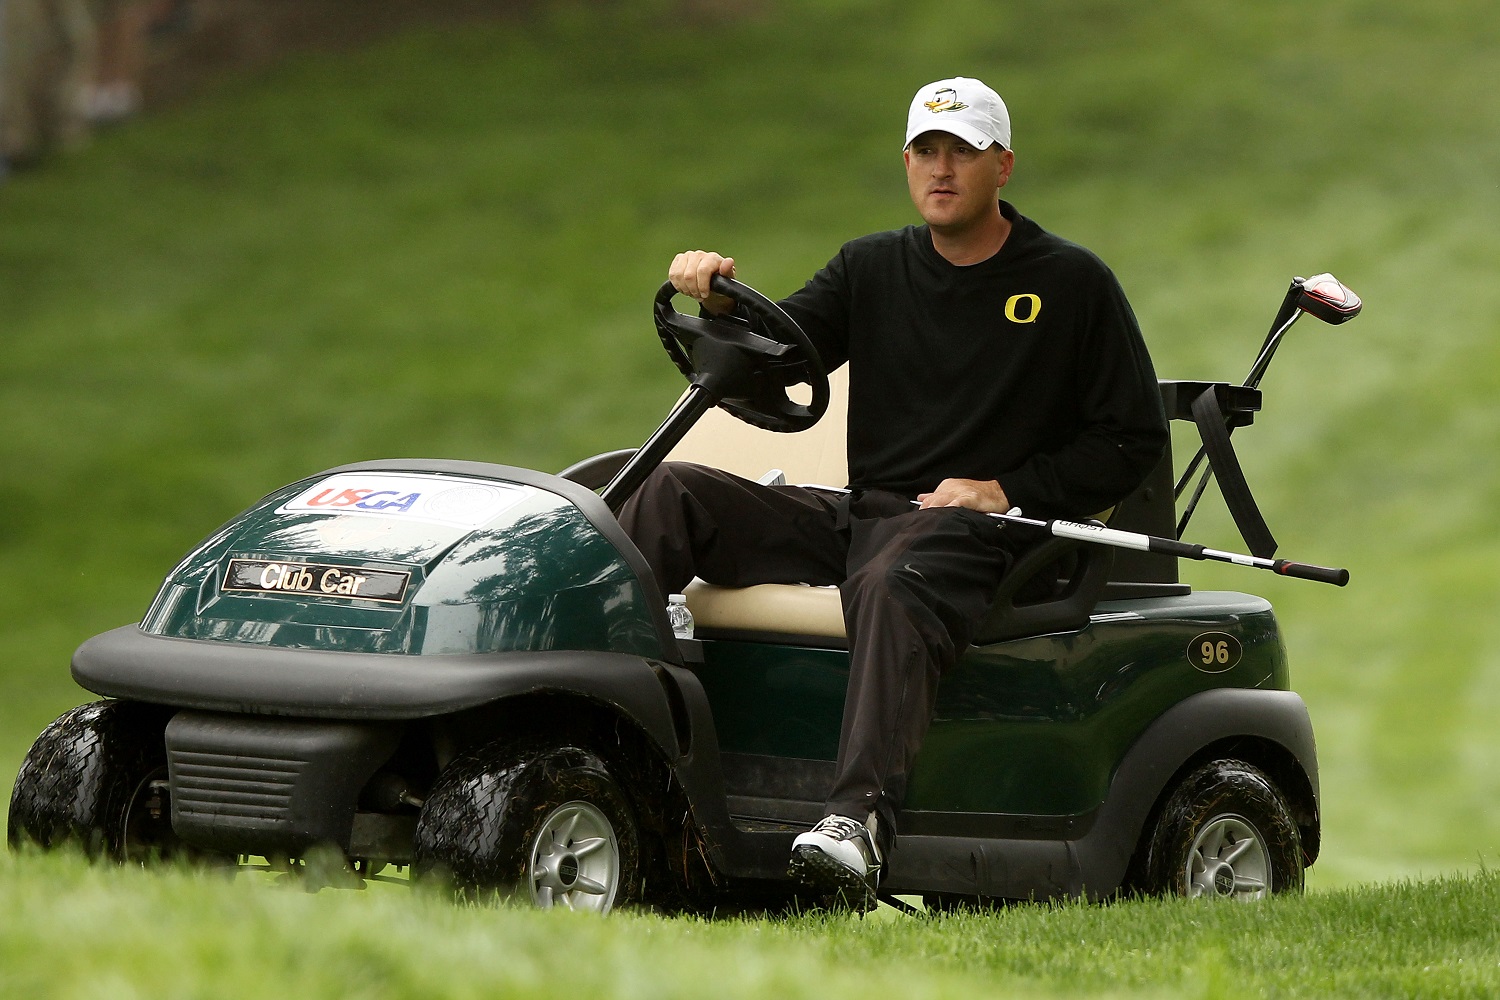 Casey Martin drives a golf cart during a practice round prior to the start of the 112th U.S. Open at The Olympic Club on June 13, 2012, in San Francisco,